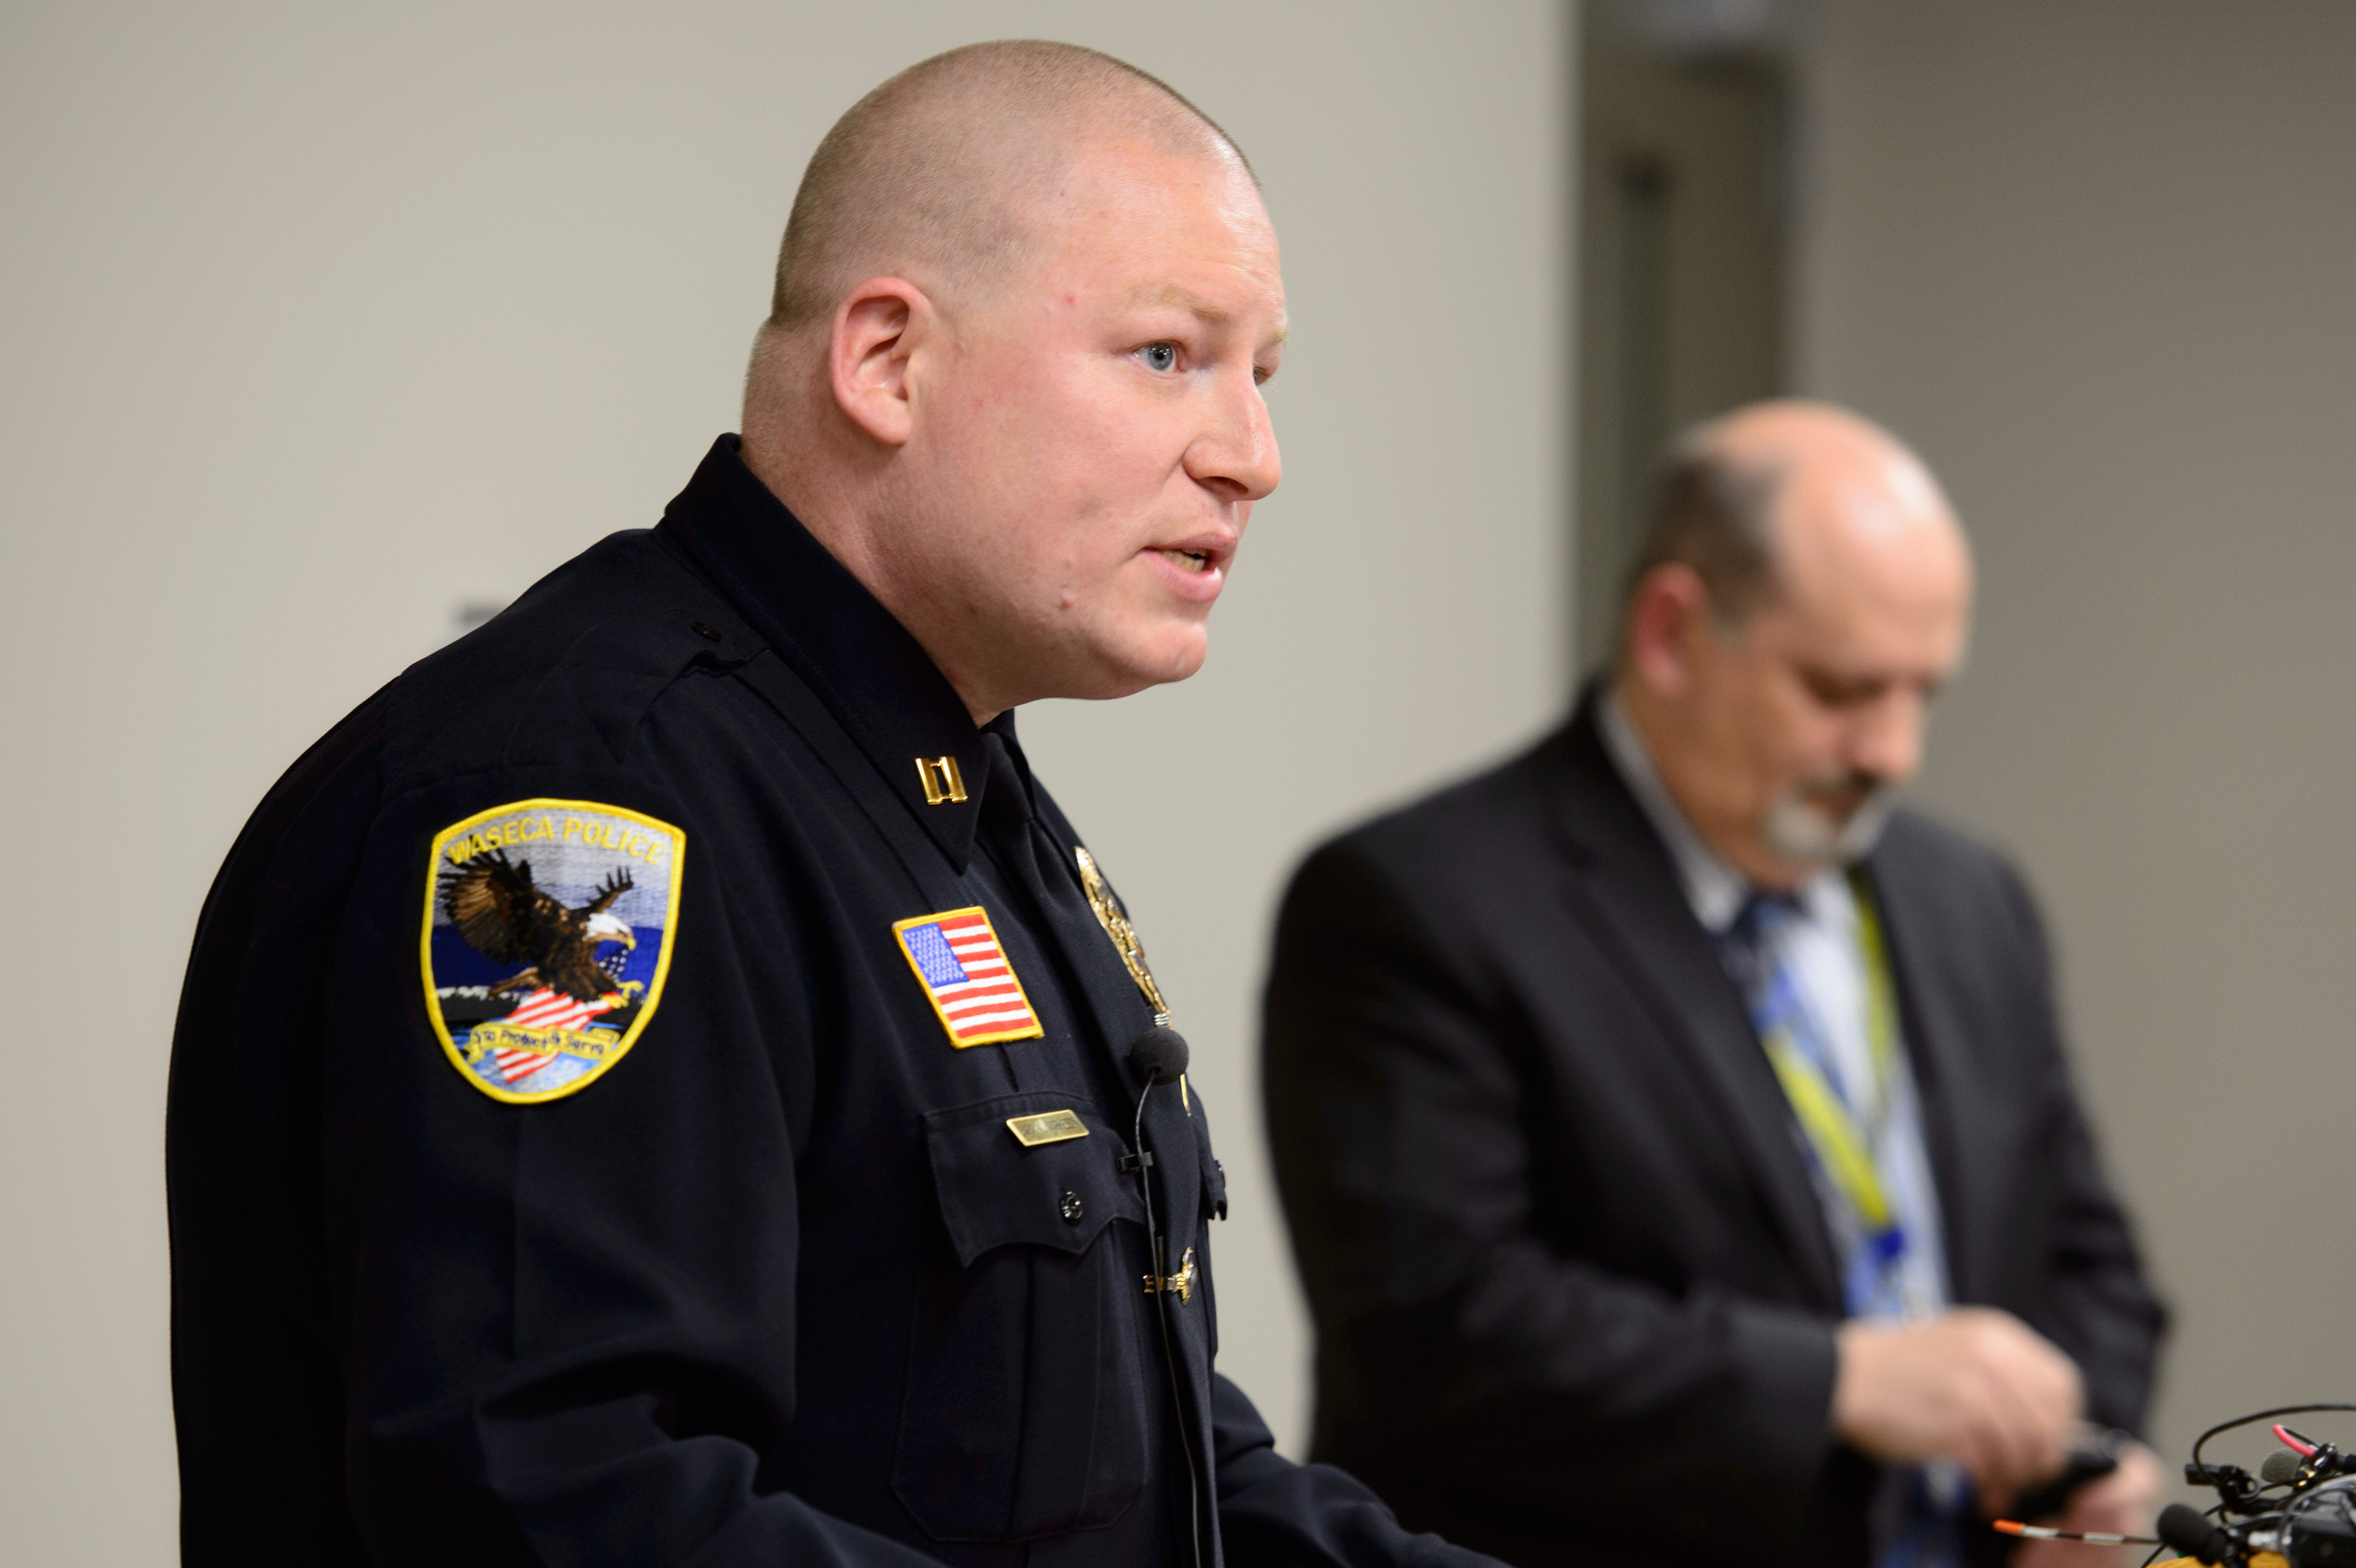 Waseca Police Captain Kris Markeson, left, and Waseca school Superintendent Tom Lee spoke at a news conference on May 1, about the  17-year-old arrested in plot to kill family and massacre students at Waseca school. (Glen Stubbe—The Star Tribune—AP)